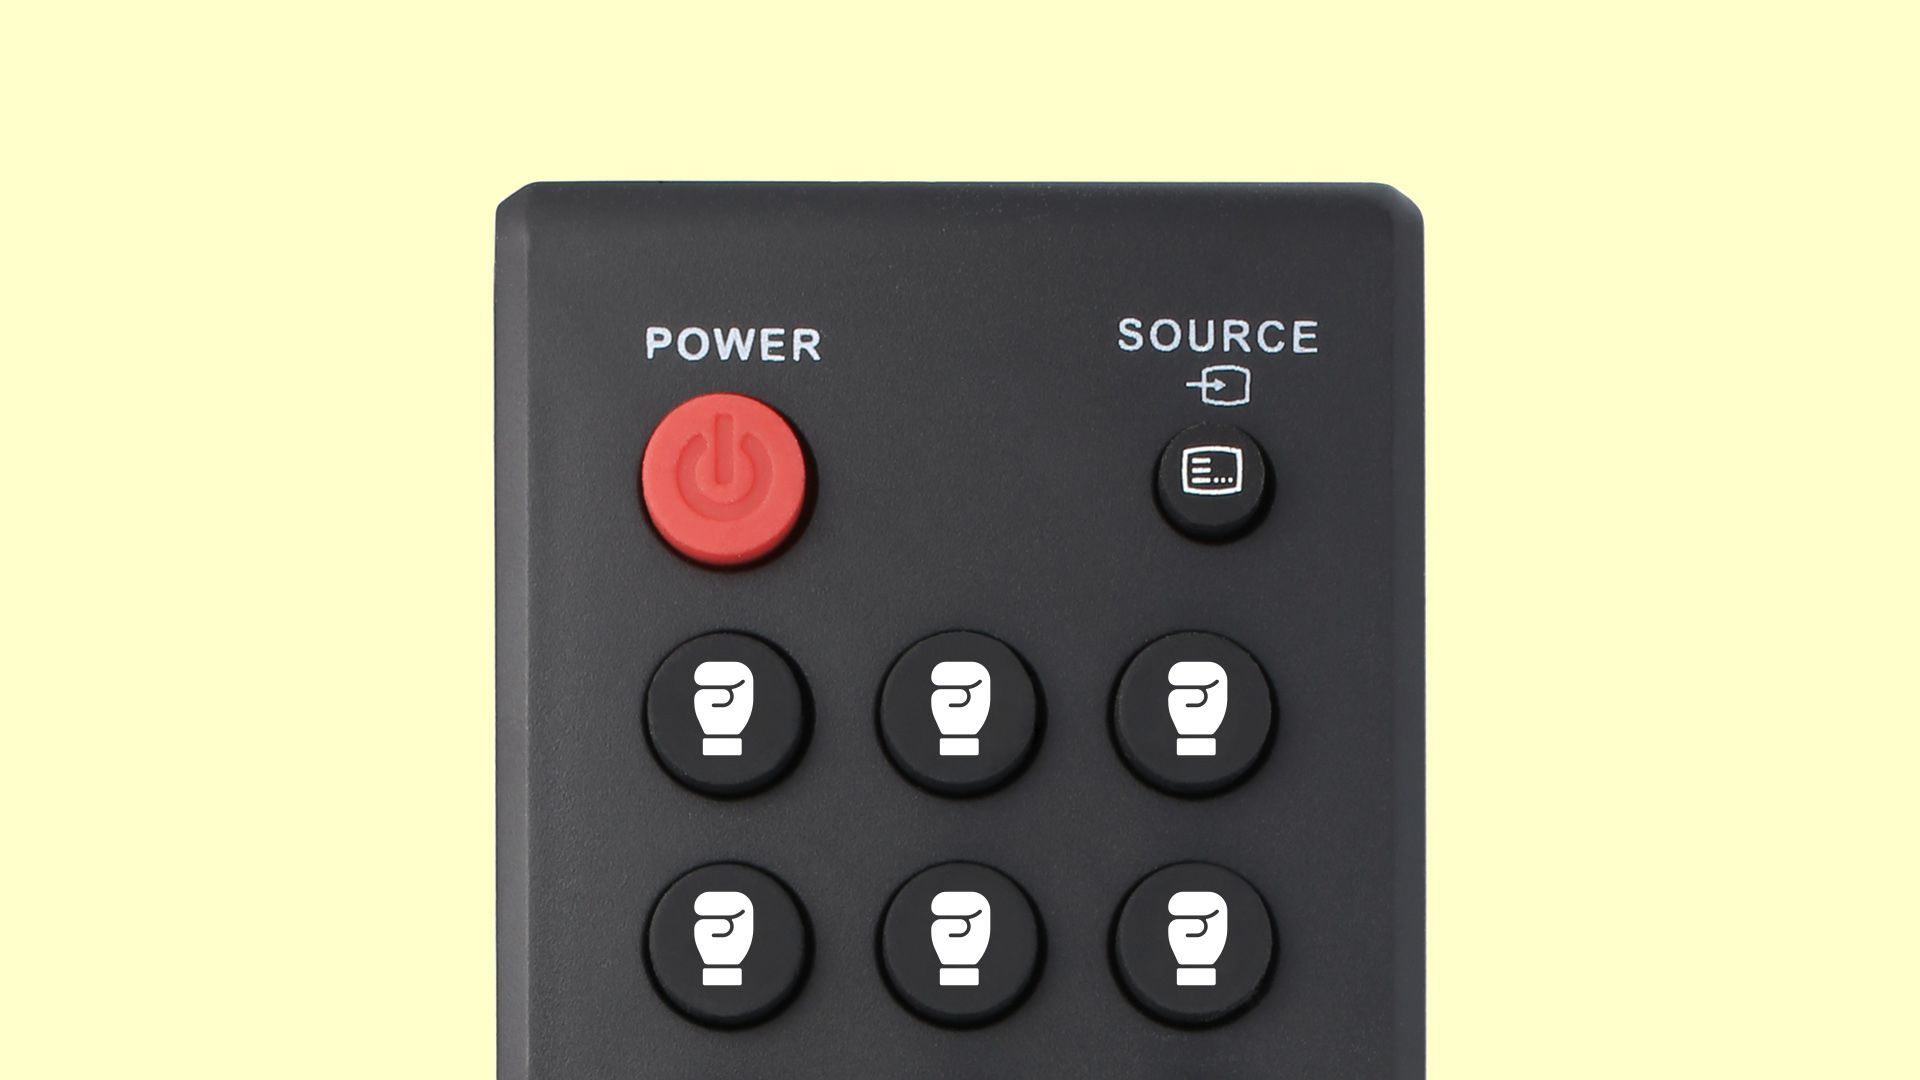 An illustration of a remote control with punch symbols on the buttons